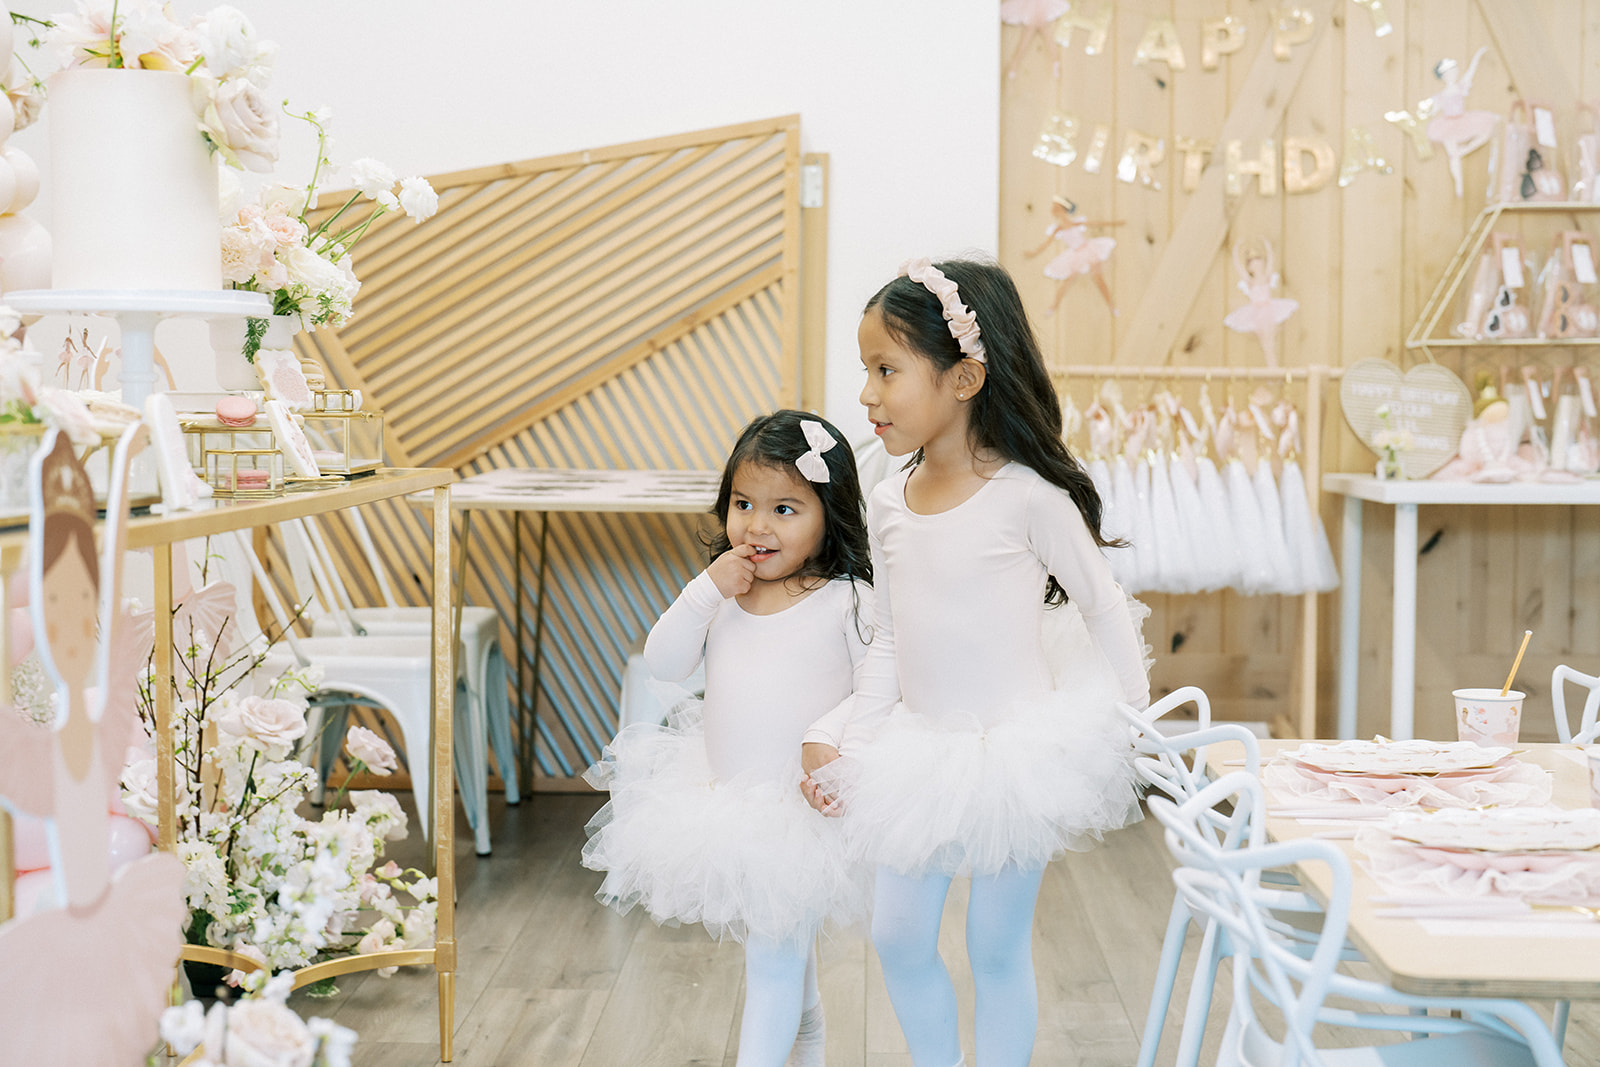 Ballerina birthday girls see their party theme setup for the first time.